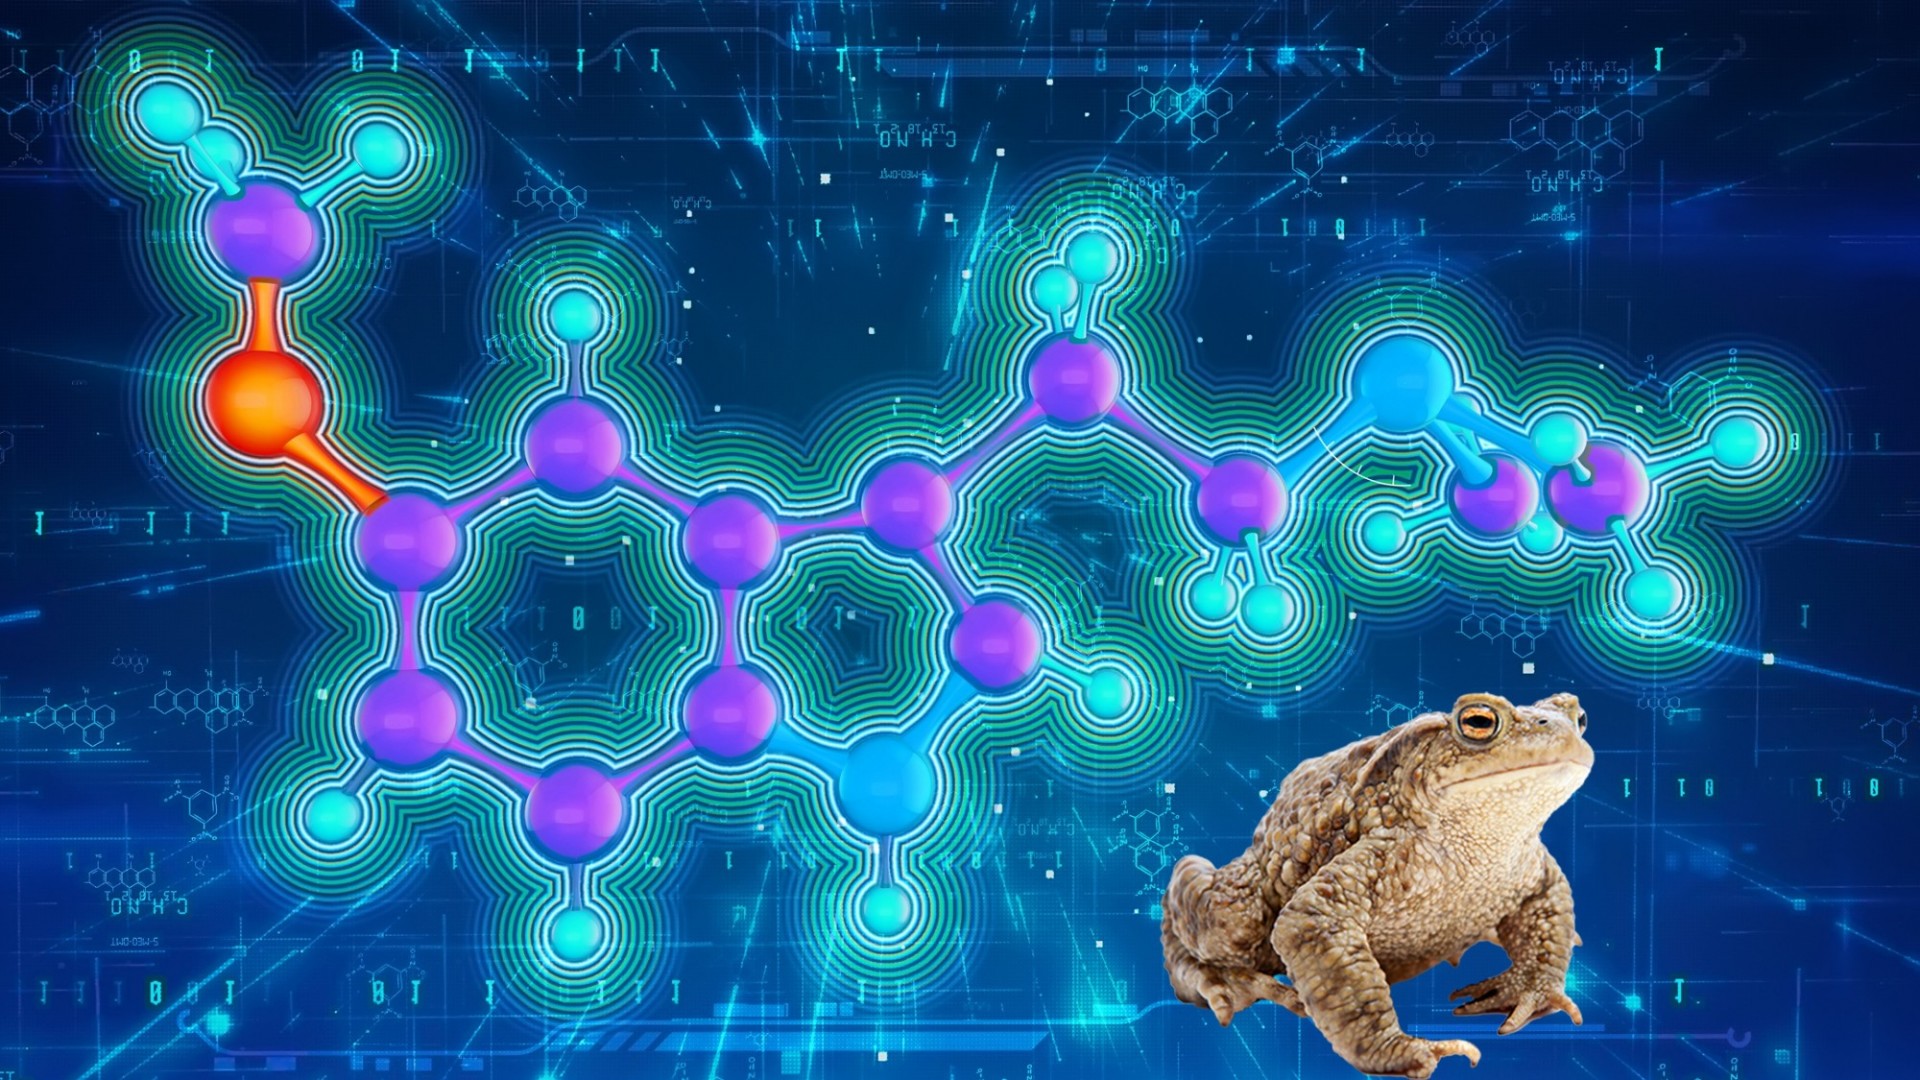 Illustration of a Colorado River toad in front of the psychedelic 5-MeO-DMT molecule that its body produces (credit: David Lankri from Hintau Aliaksei images. [Toad/Shutterstock and Molecule/Adobe Stock])